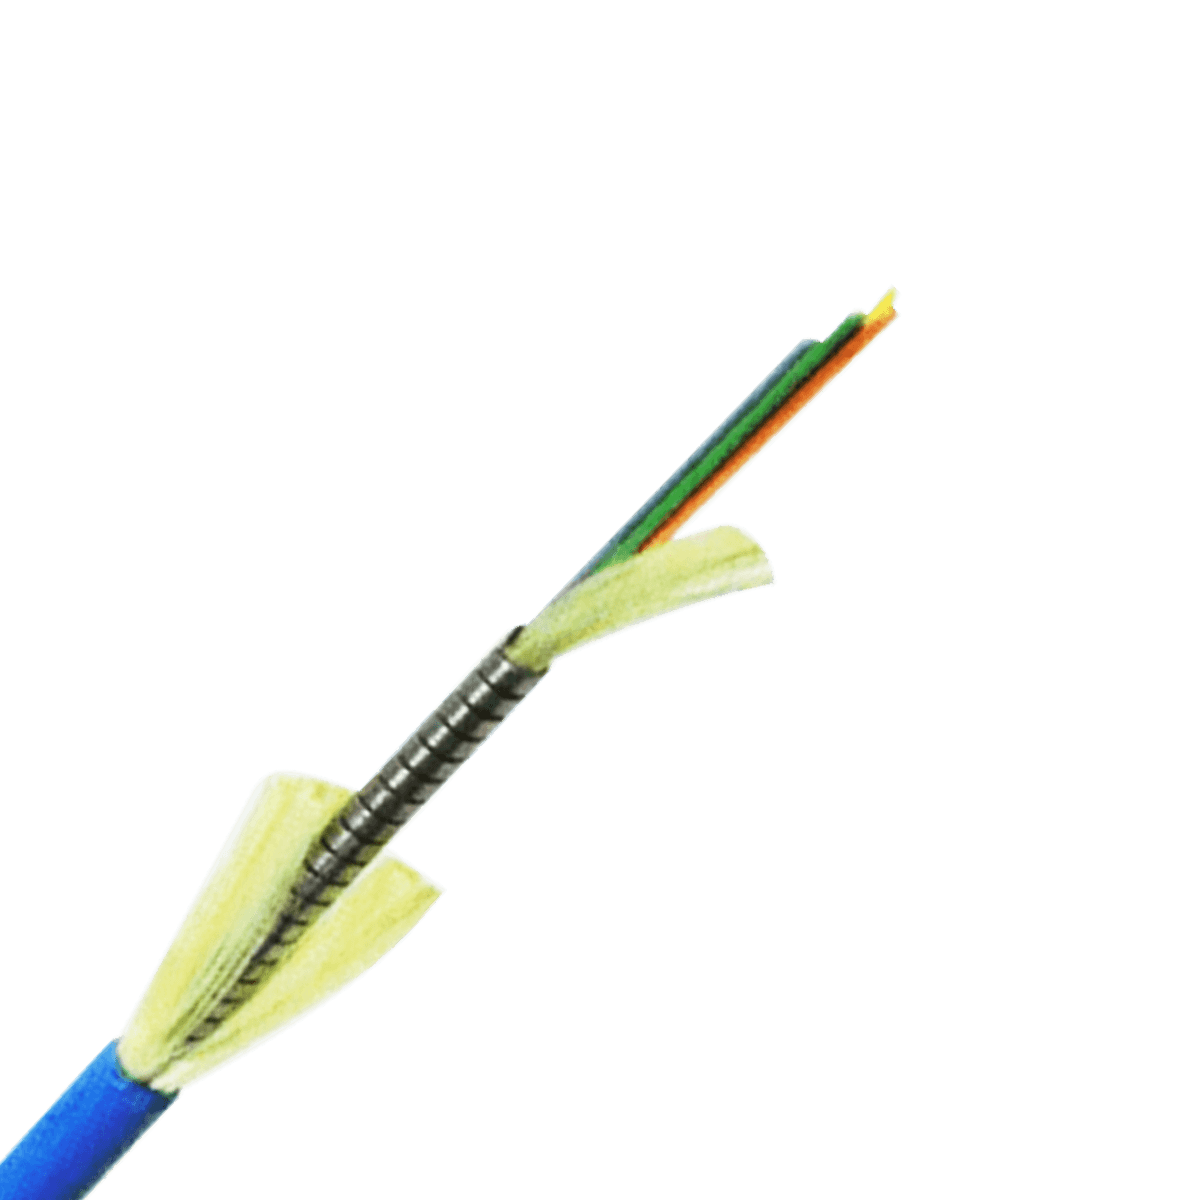 Distribution Armored Cable